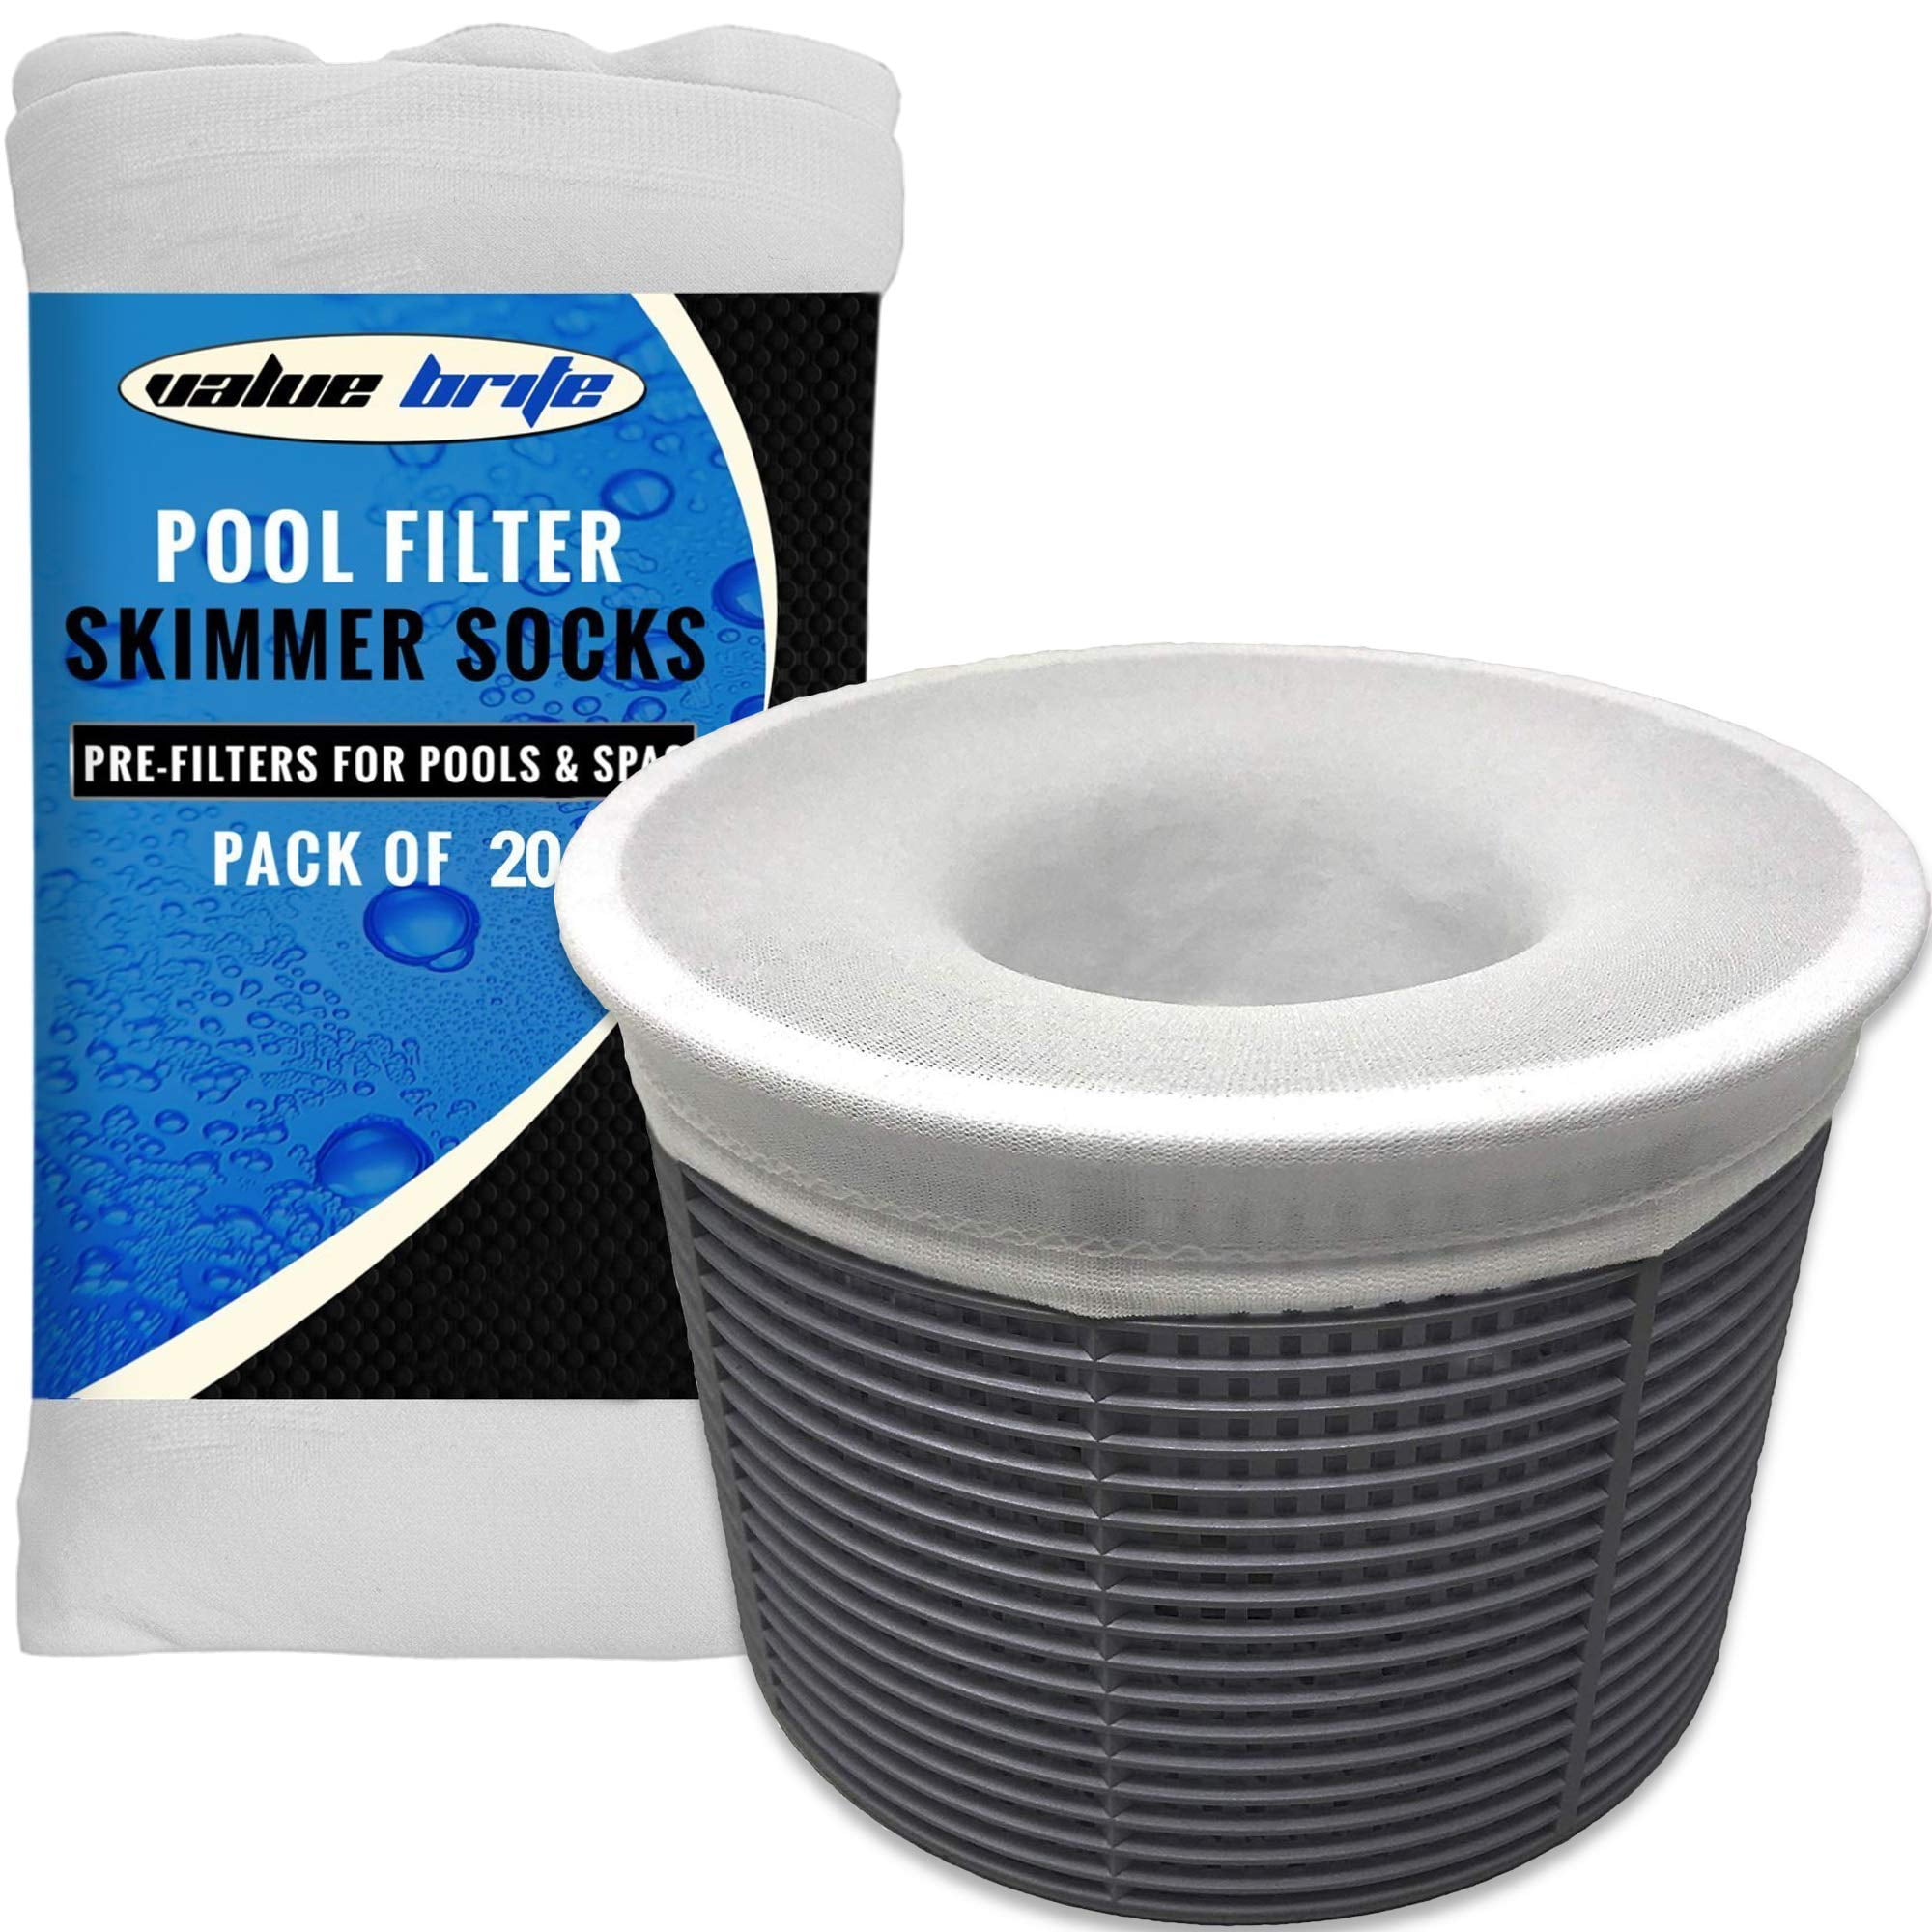 and Skimmers Pack of 12 Fine Mesh Swimming Pool & Spa Pre-Filter Savers for Filters Pool Skimmer Socks Baskets 